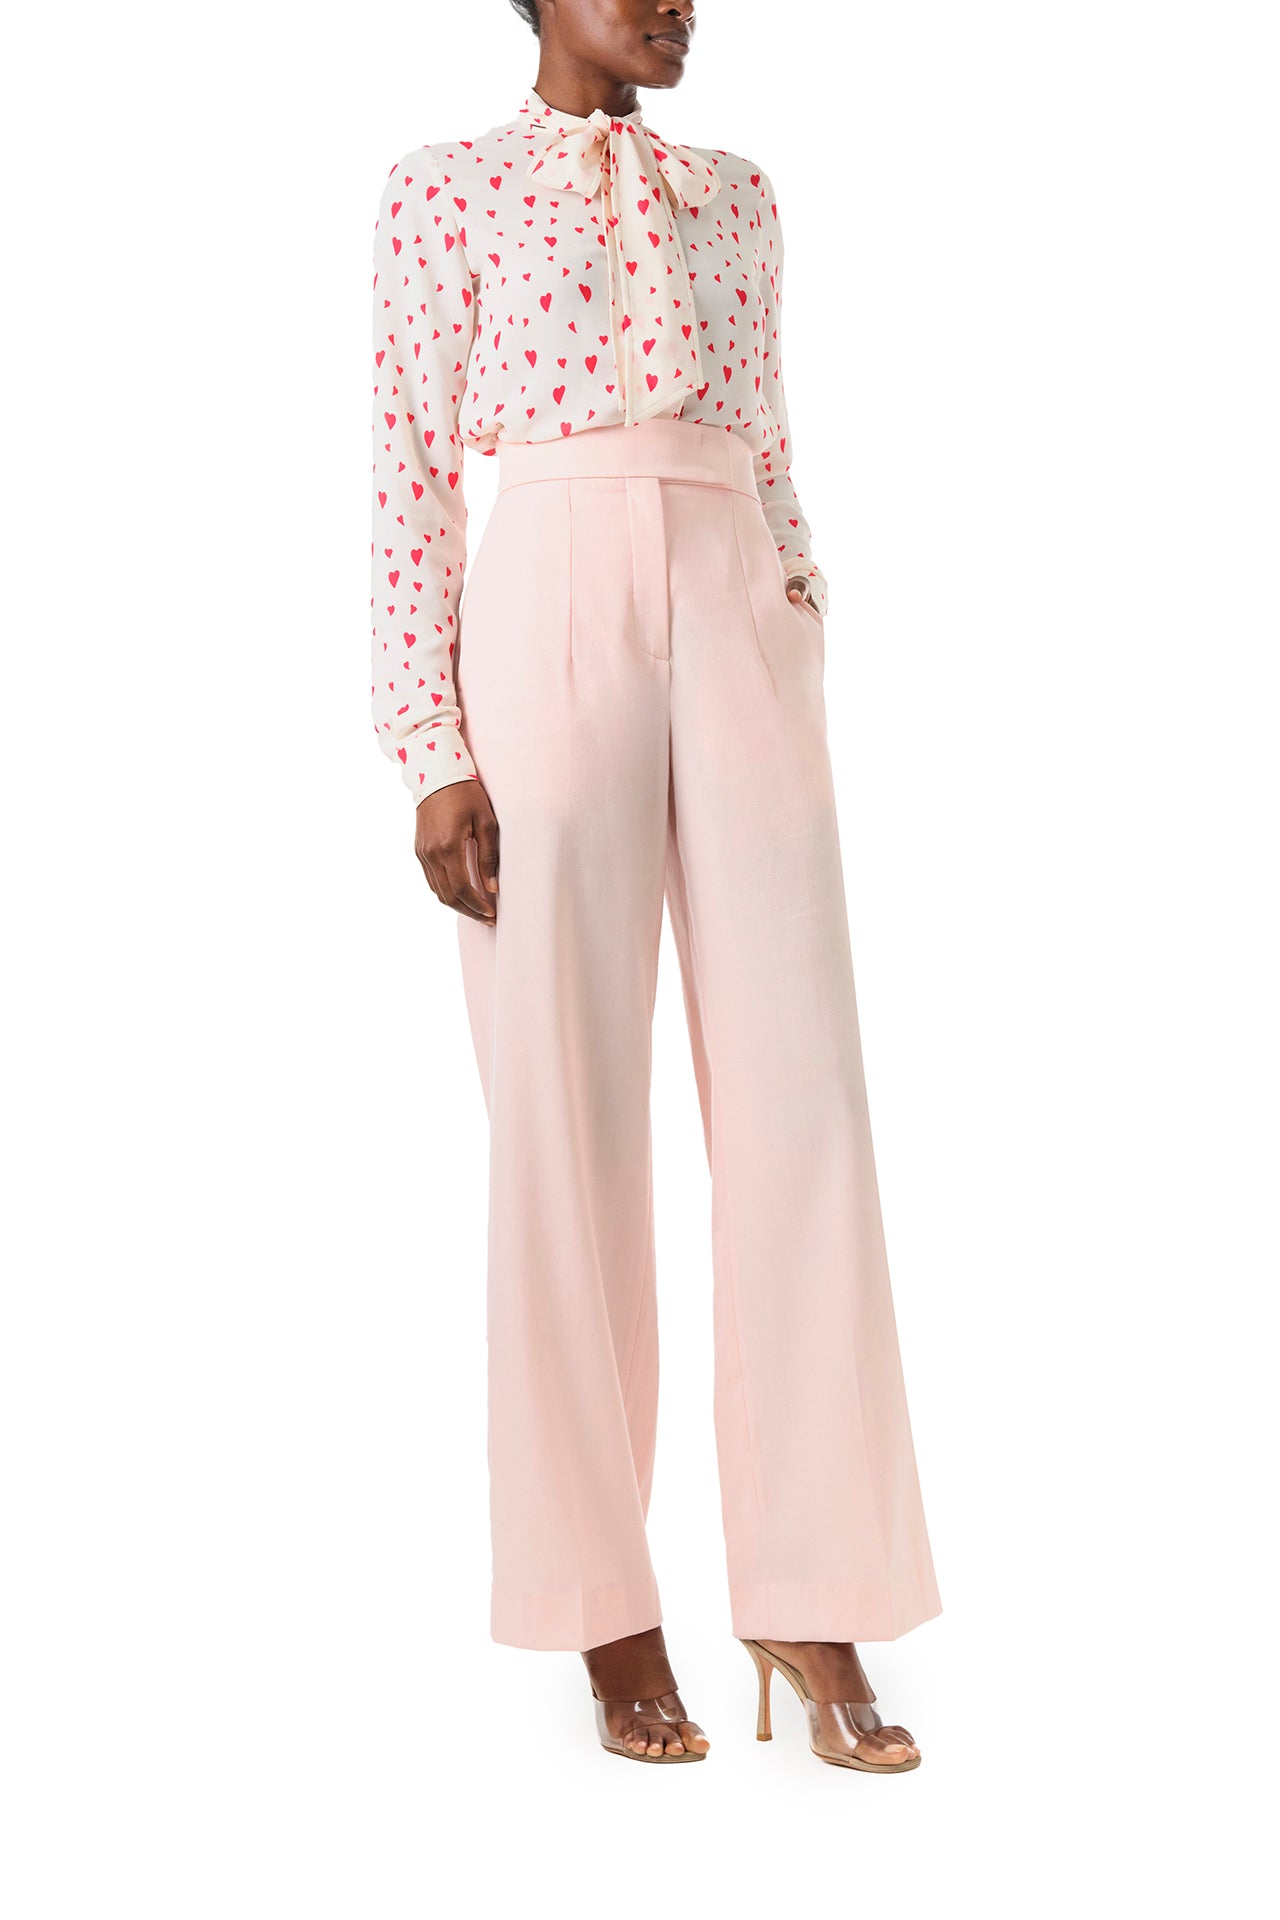 Monique Lhuillier Fall 2024 long sleeve, bow tie blouse in Heart Printed Georgette - side.